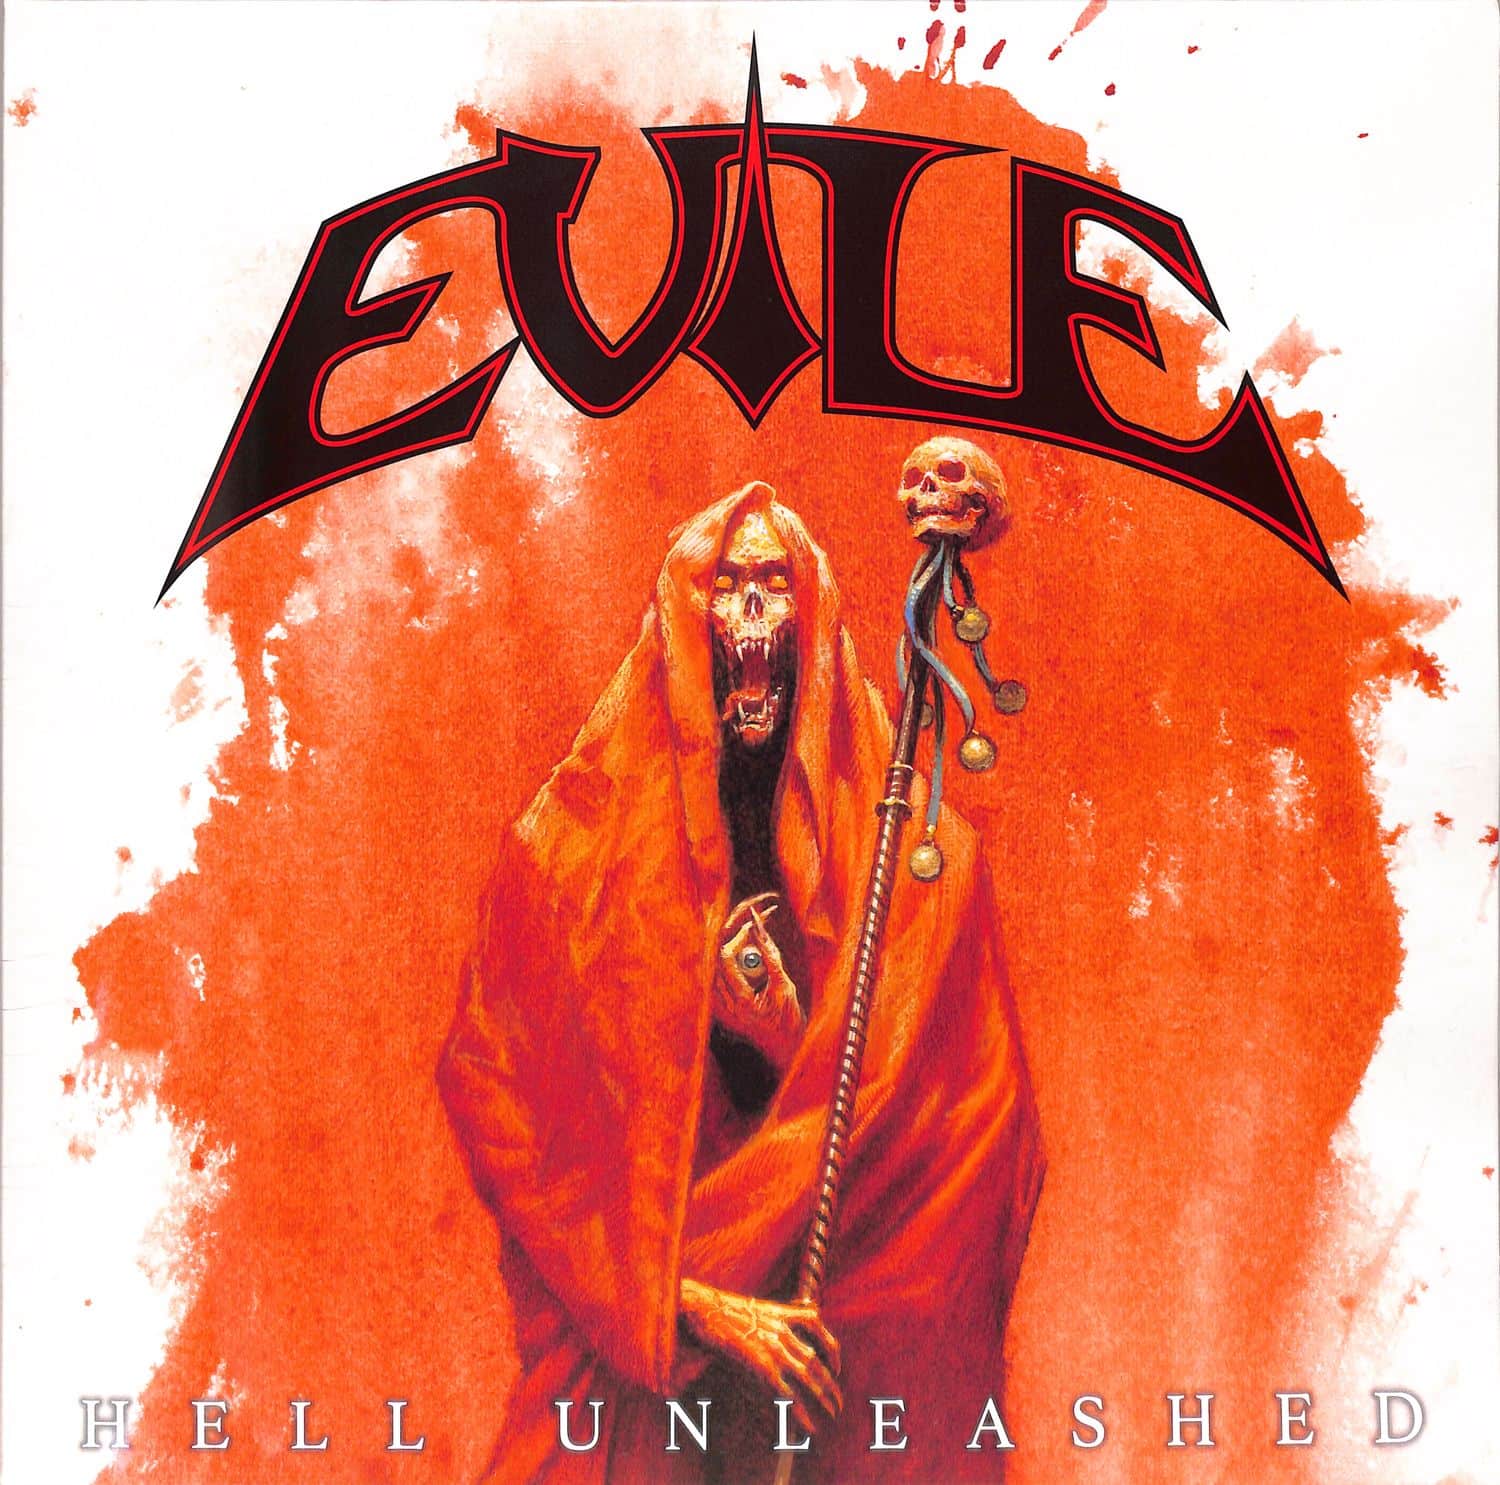 Evile - HELL UNLEASHED 